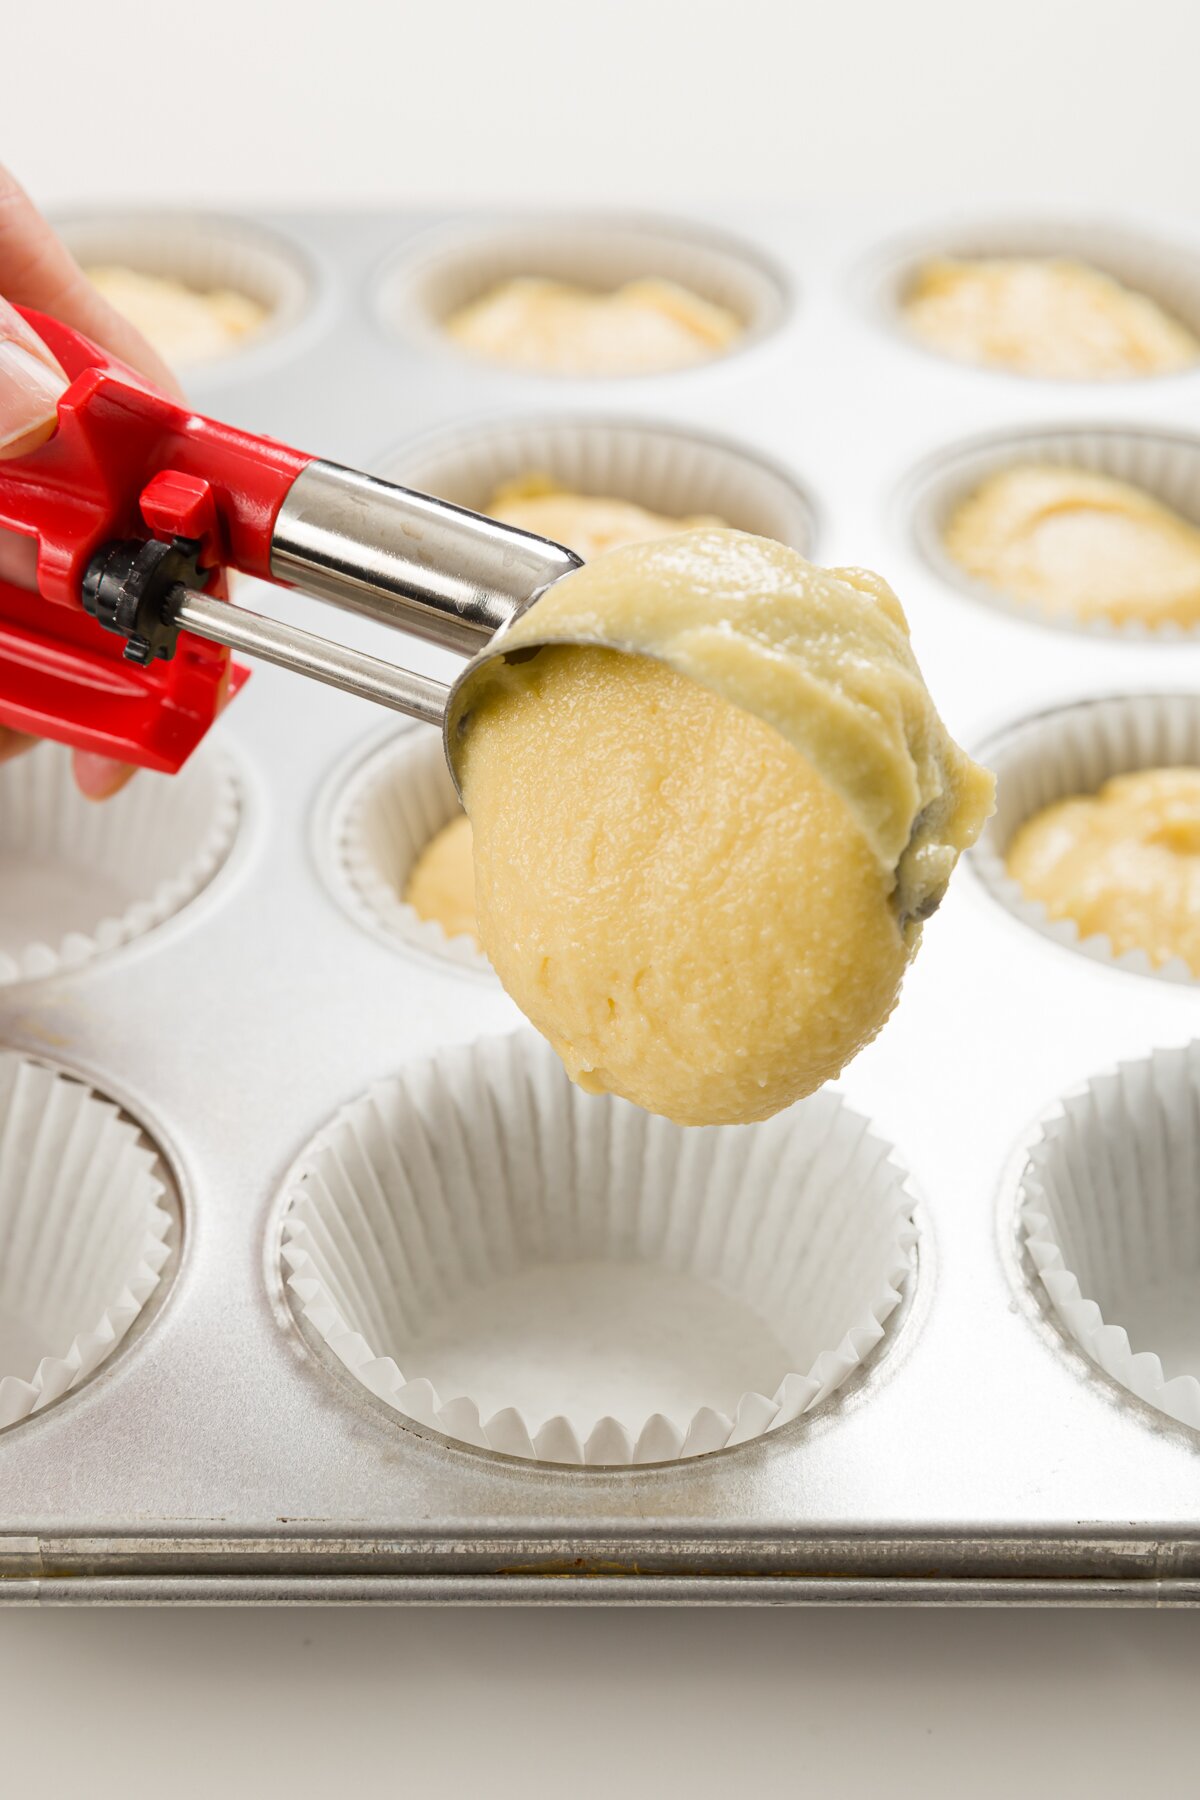 Stef using a disher to fill a cupcake liner with pound cake cupcake batter